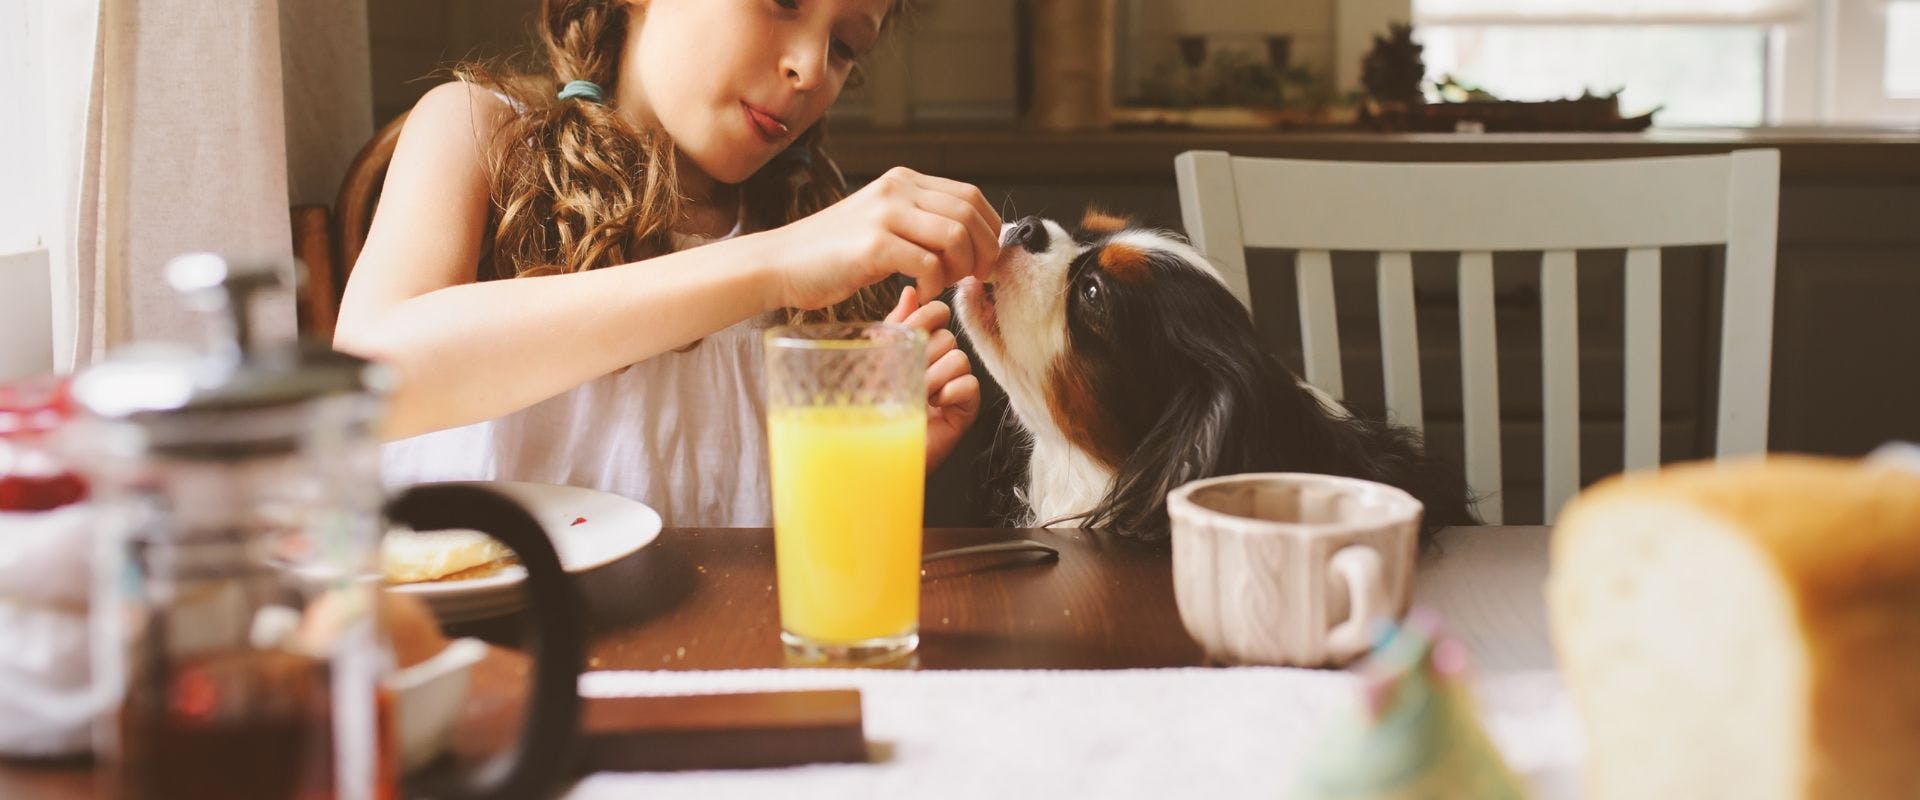 Child feeding a Cavalier King Charles Spaniel at the dinner table